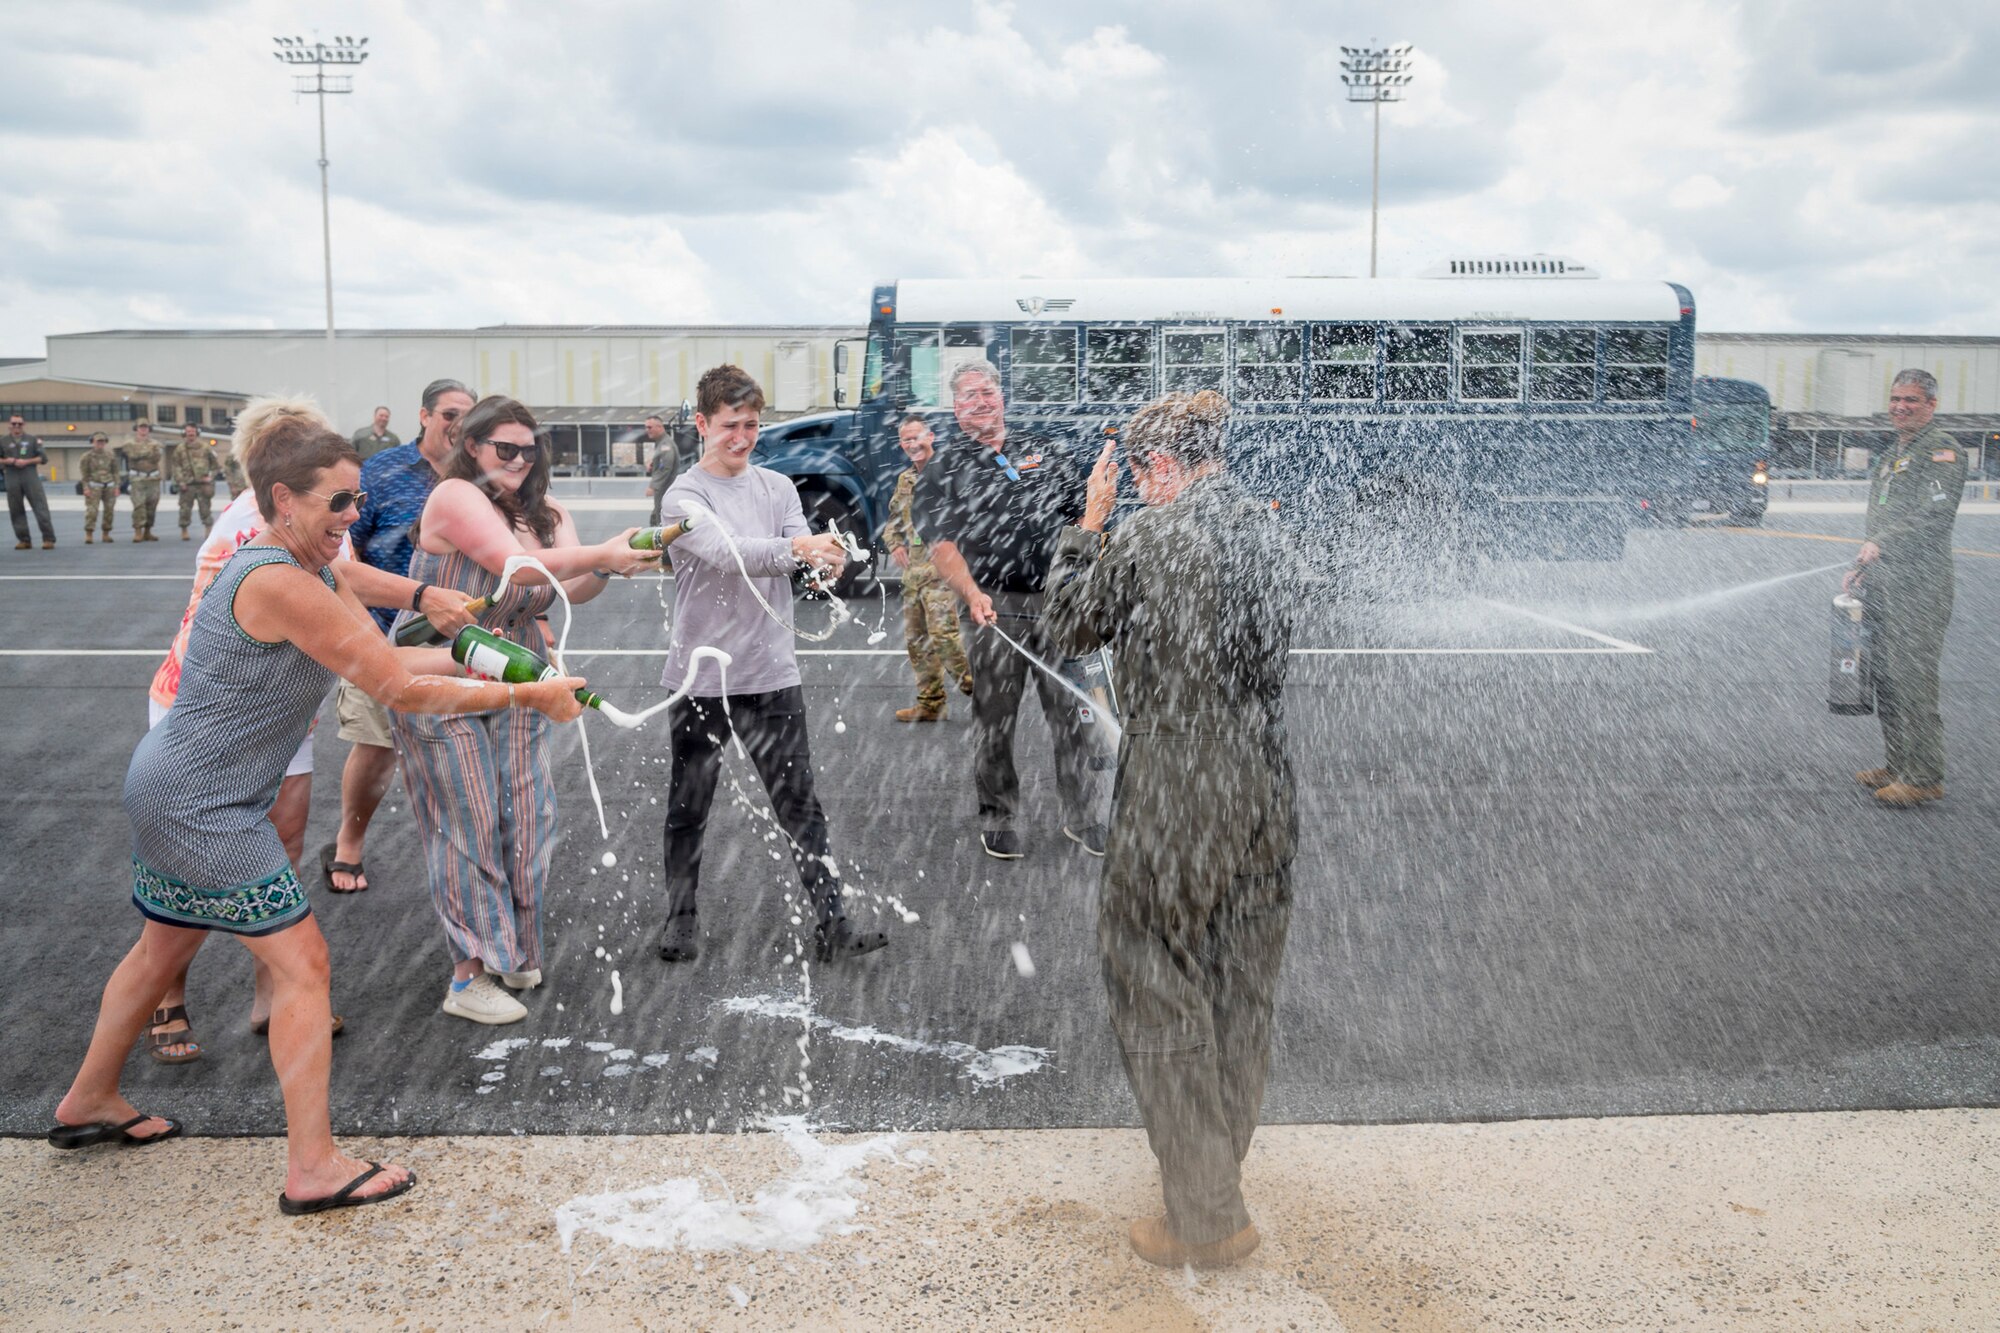 U.S. Air Force Lt. Col. Anita West-Werner, 512th Operations Group, Dover Air Force Base, Delaware, gets drenched by family and friends after her final flight June 7, 2022. A final flight, also known as fini-flight, is a tradition for pilots and some aircrew members who are retiring or moving to another base. West-Werner flew her final flight after 26 years with the 512th AW. (U.S. Air Force photo by Mauricio Campino)